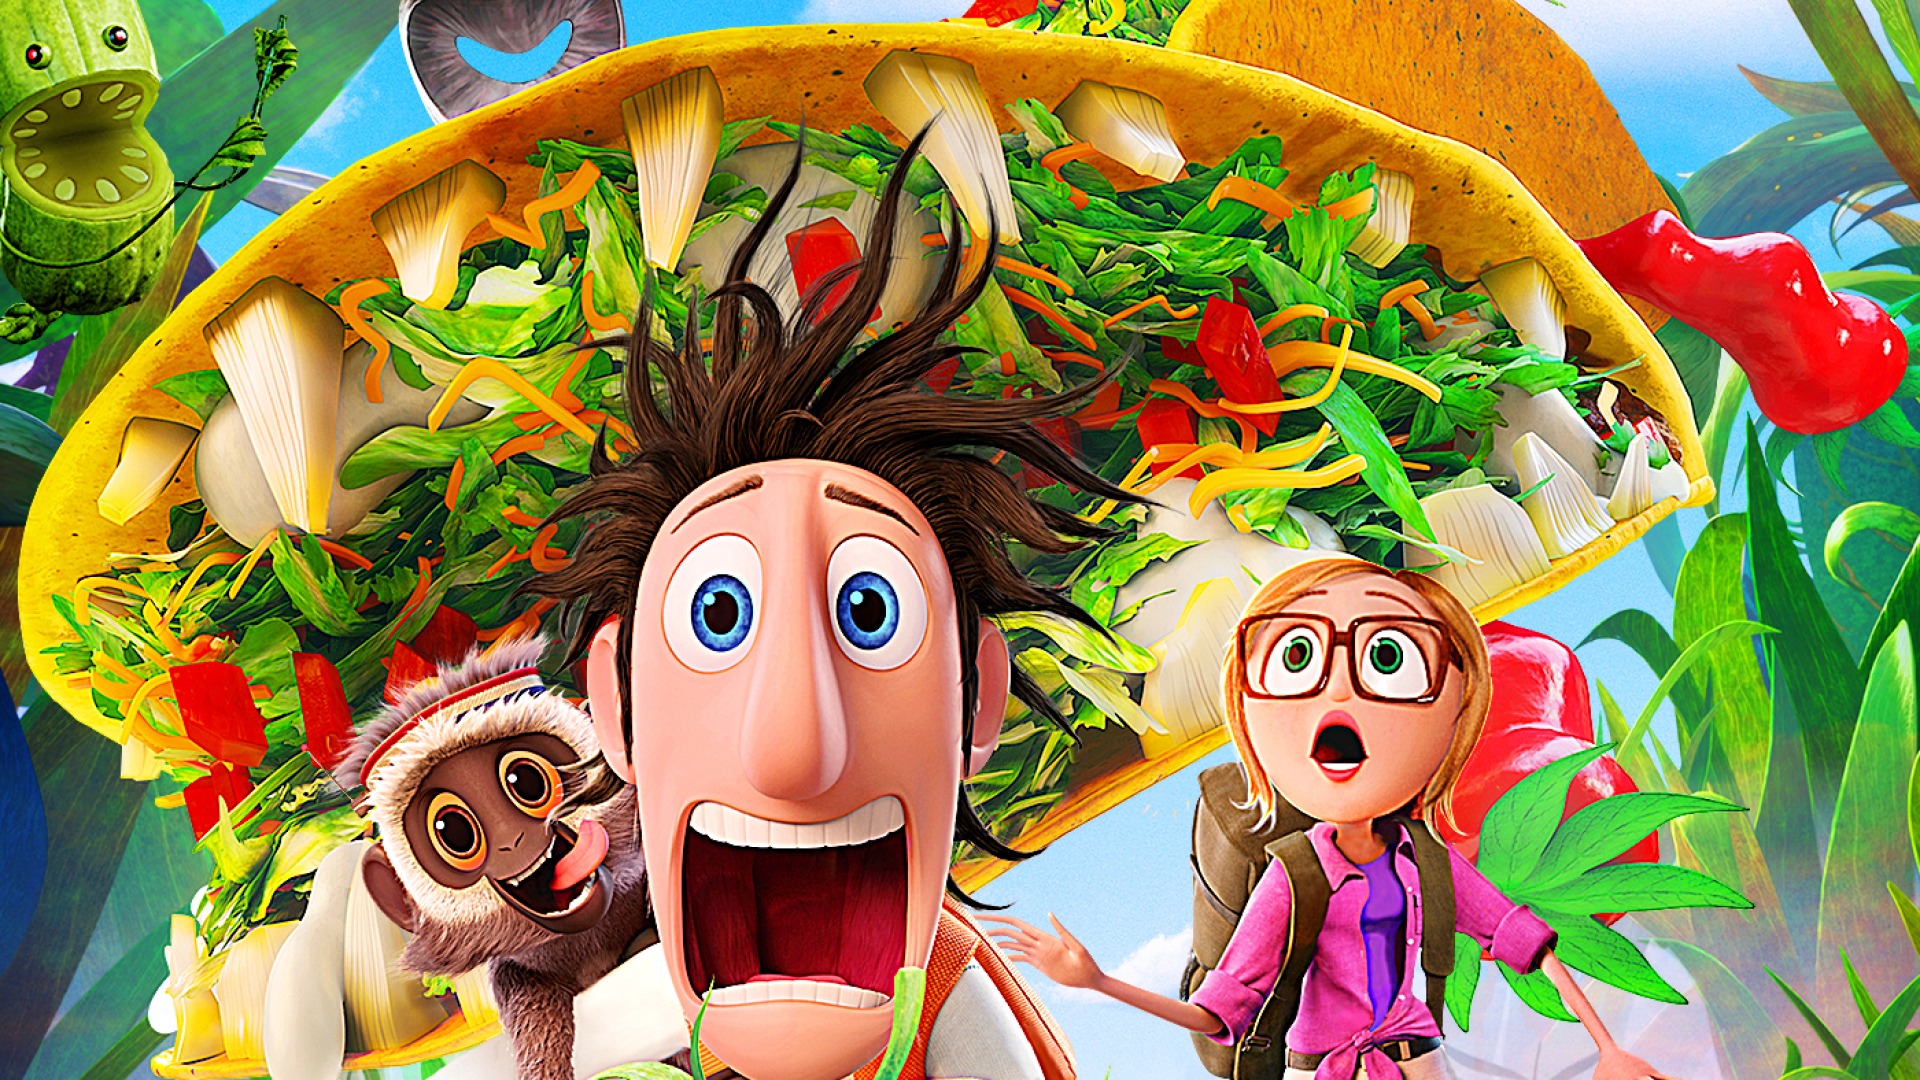 89: Cloudy with a Chance of Meatballs 2 (with Jackson Baly. 